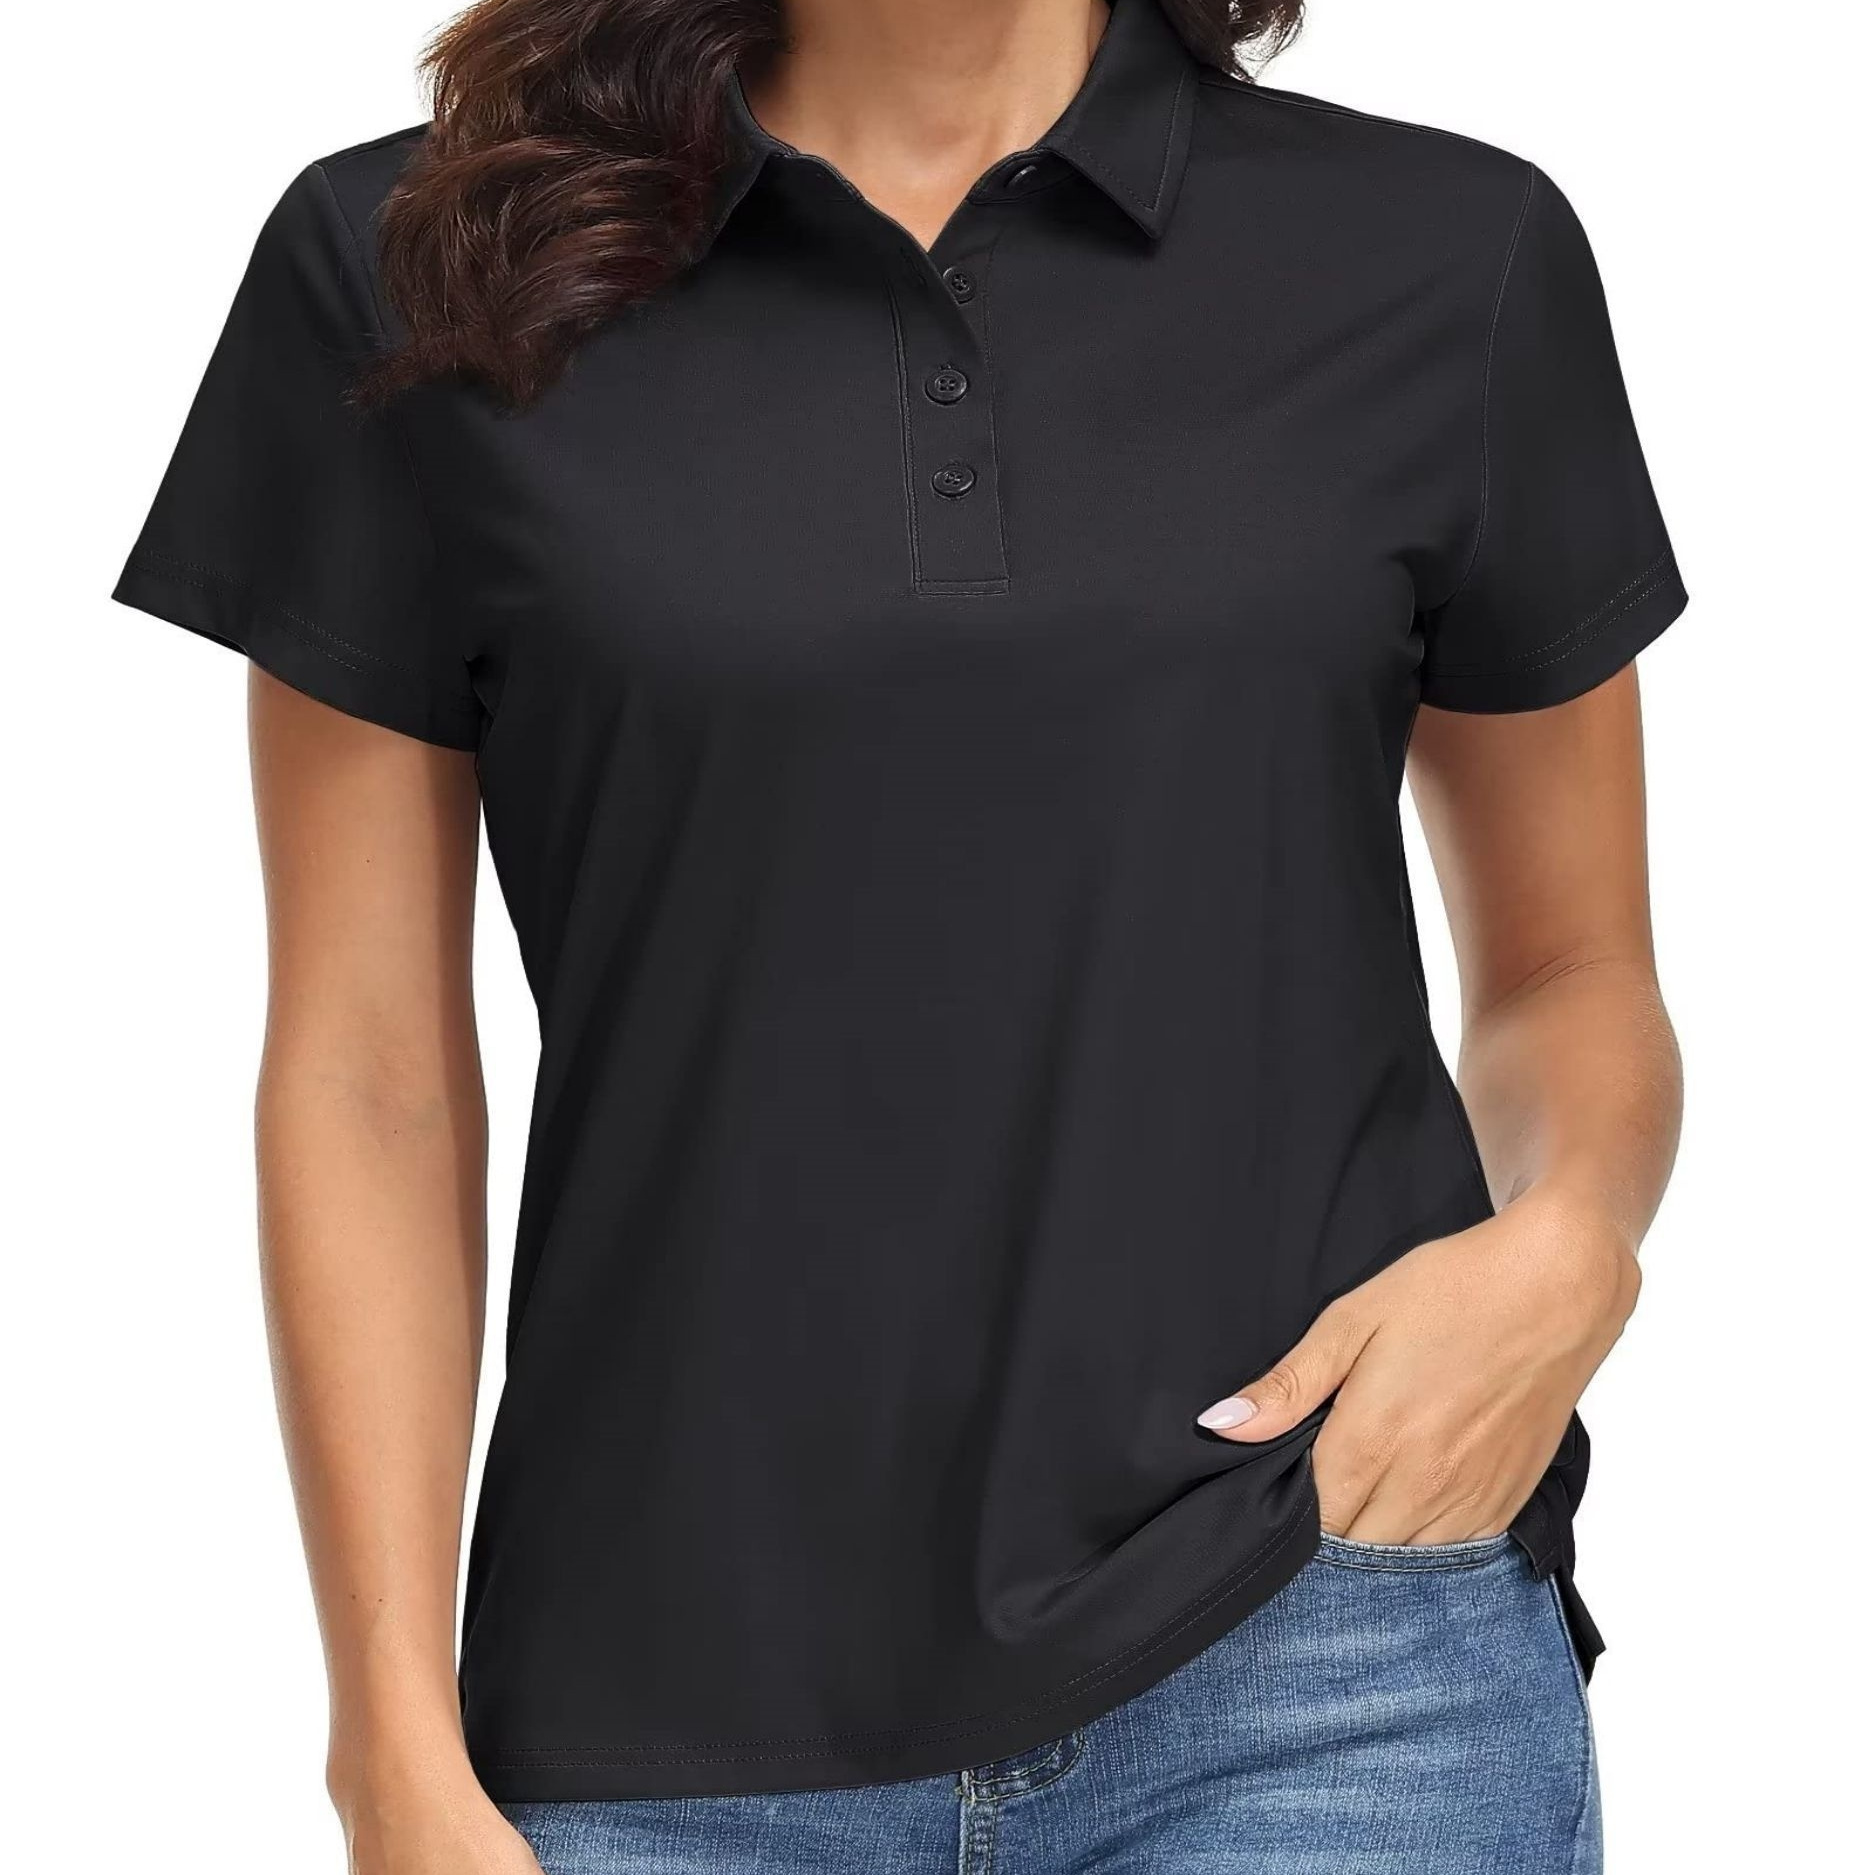 

Solid Color Button Collared T-shirt, Casual Short Sleeve Quick Dry Golf Top, Women's Clothing